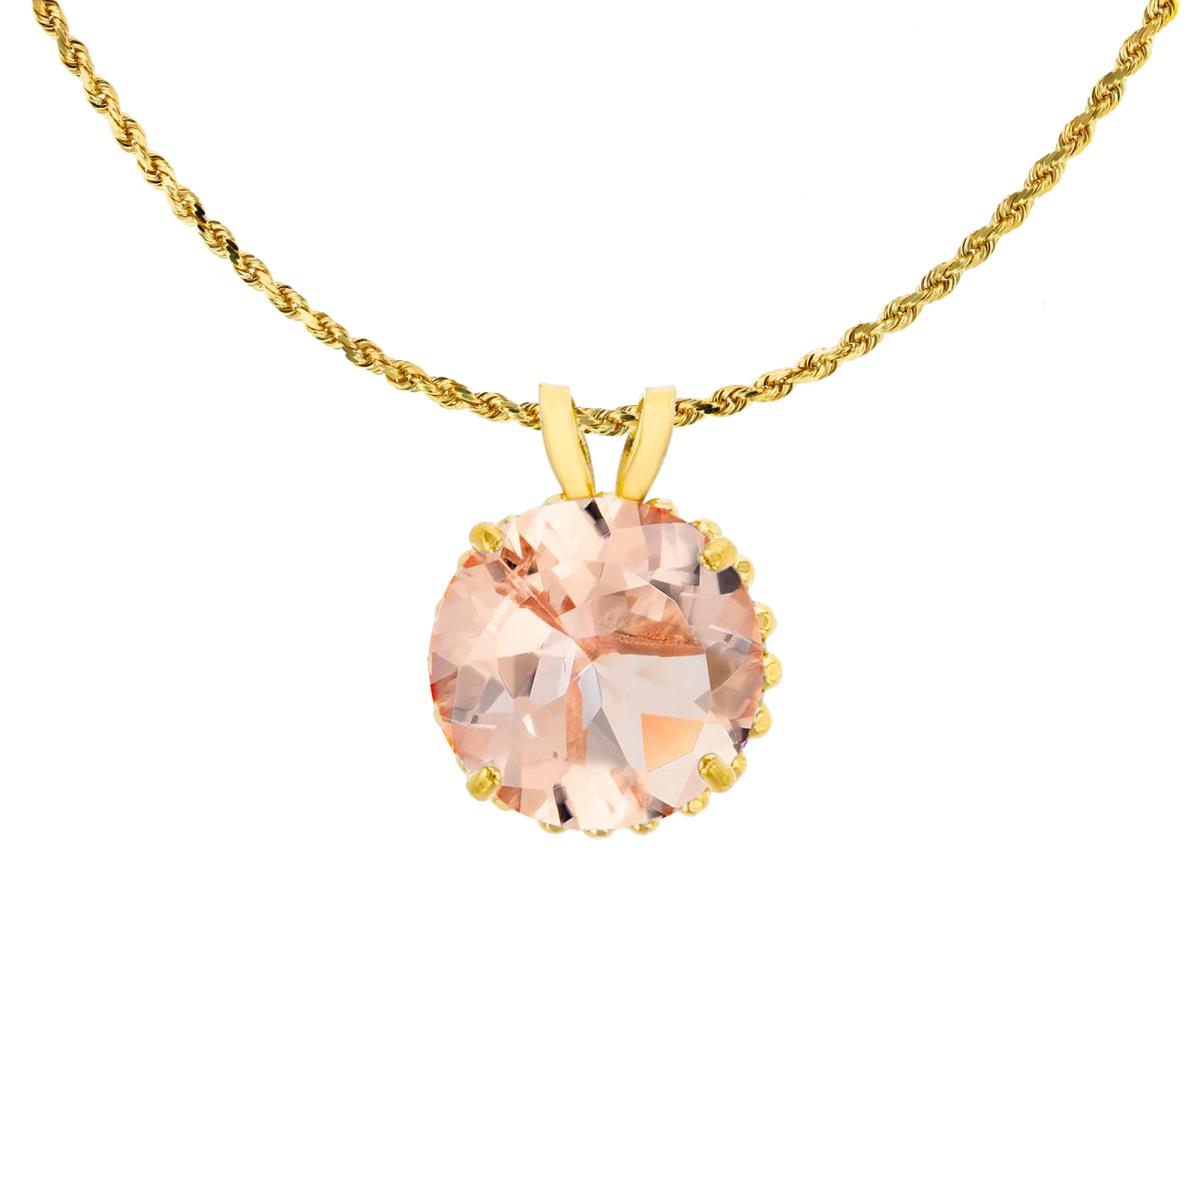 14K Yellow Gold 7mm Rd Cut Morganite with Bead Frame Rabbit Ear 18" Rope Chain Necklace